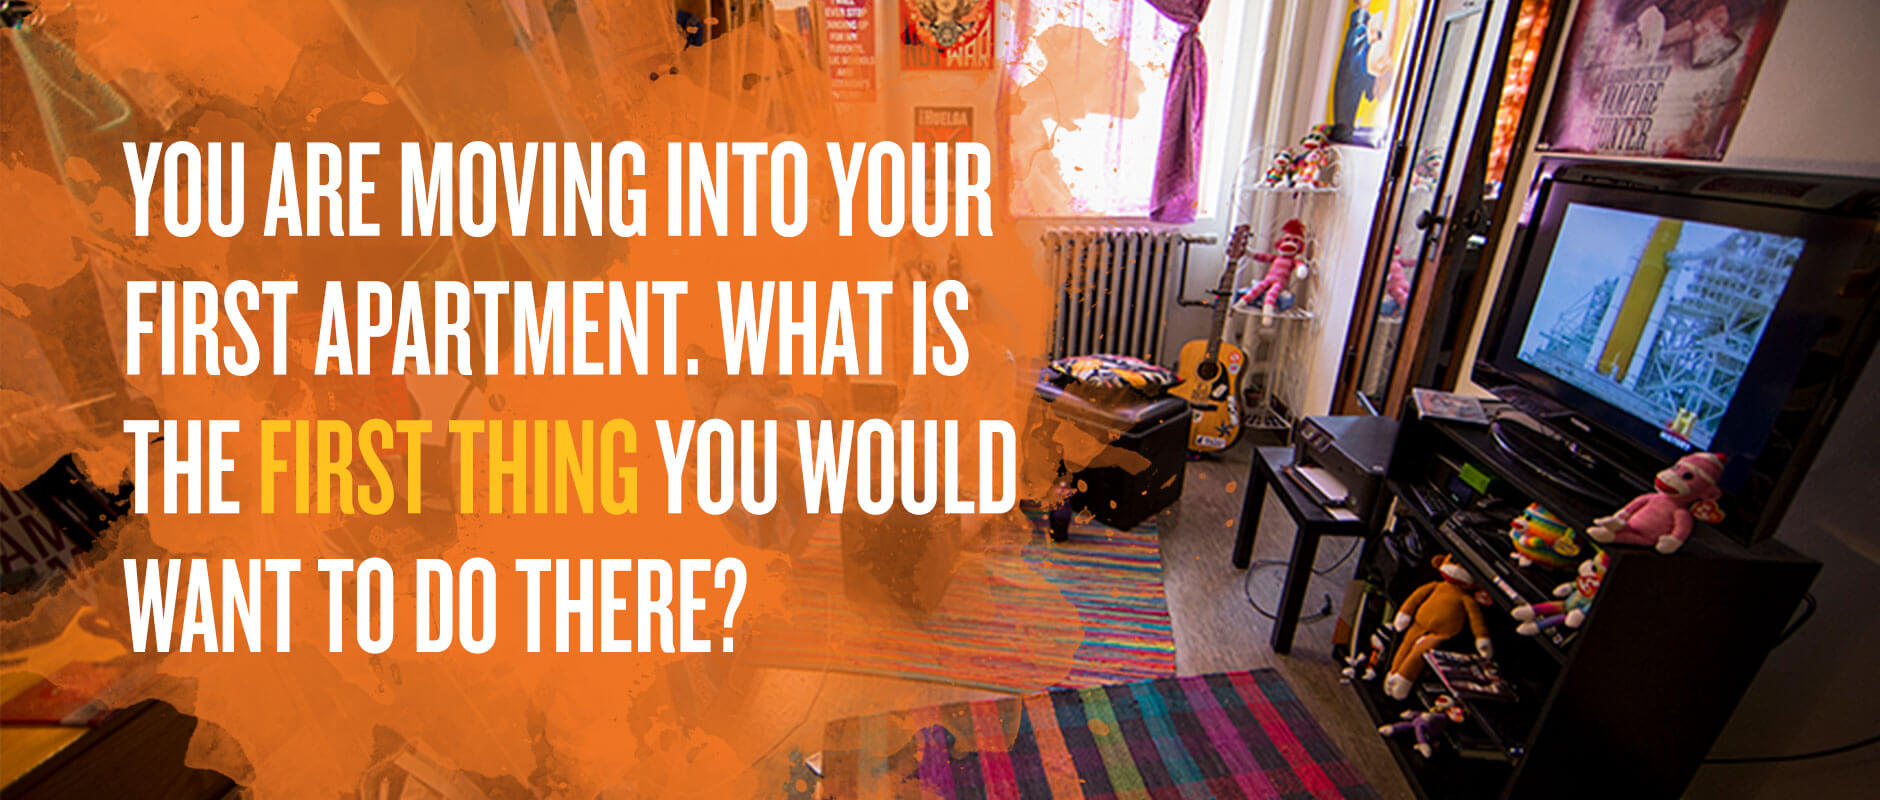 You are moving into your first apartment. What is the first thing you would want to do there?